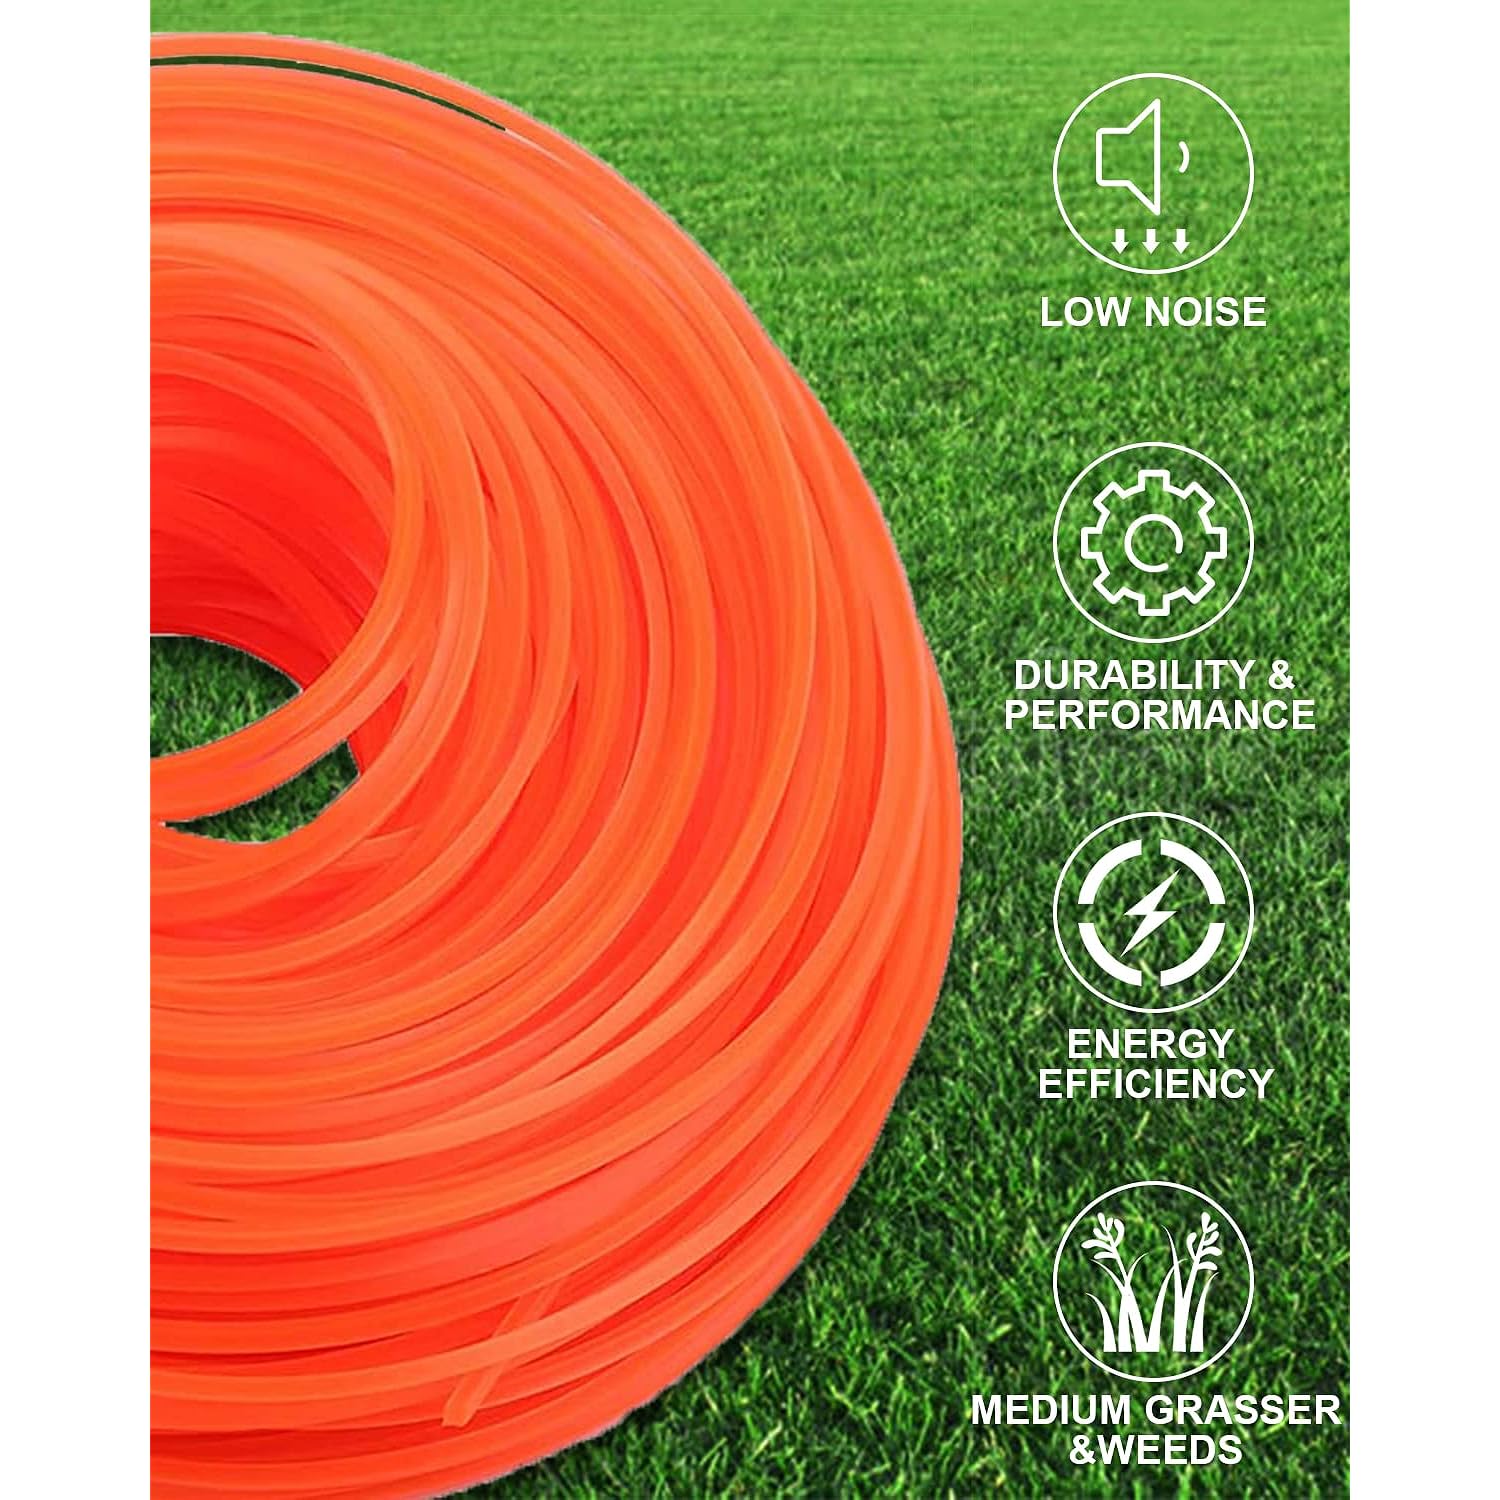 TKM Home 3 Pound Trimmer Line .105, String Trimmer Line Donut, Weed Eater String With Line Cutter, Orange Square